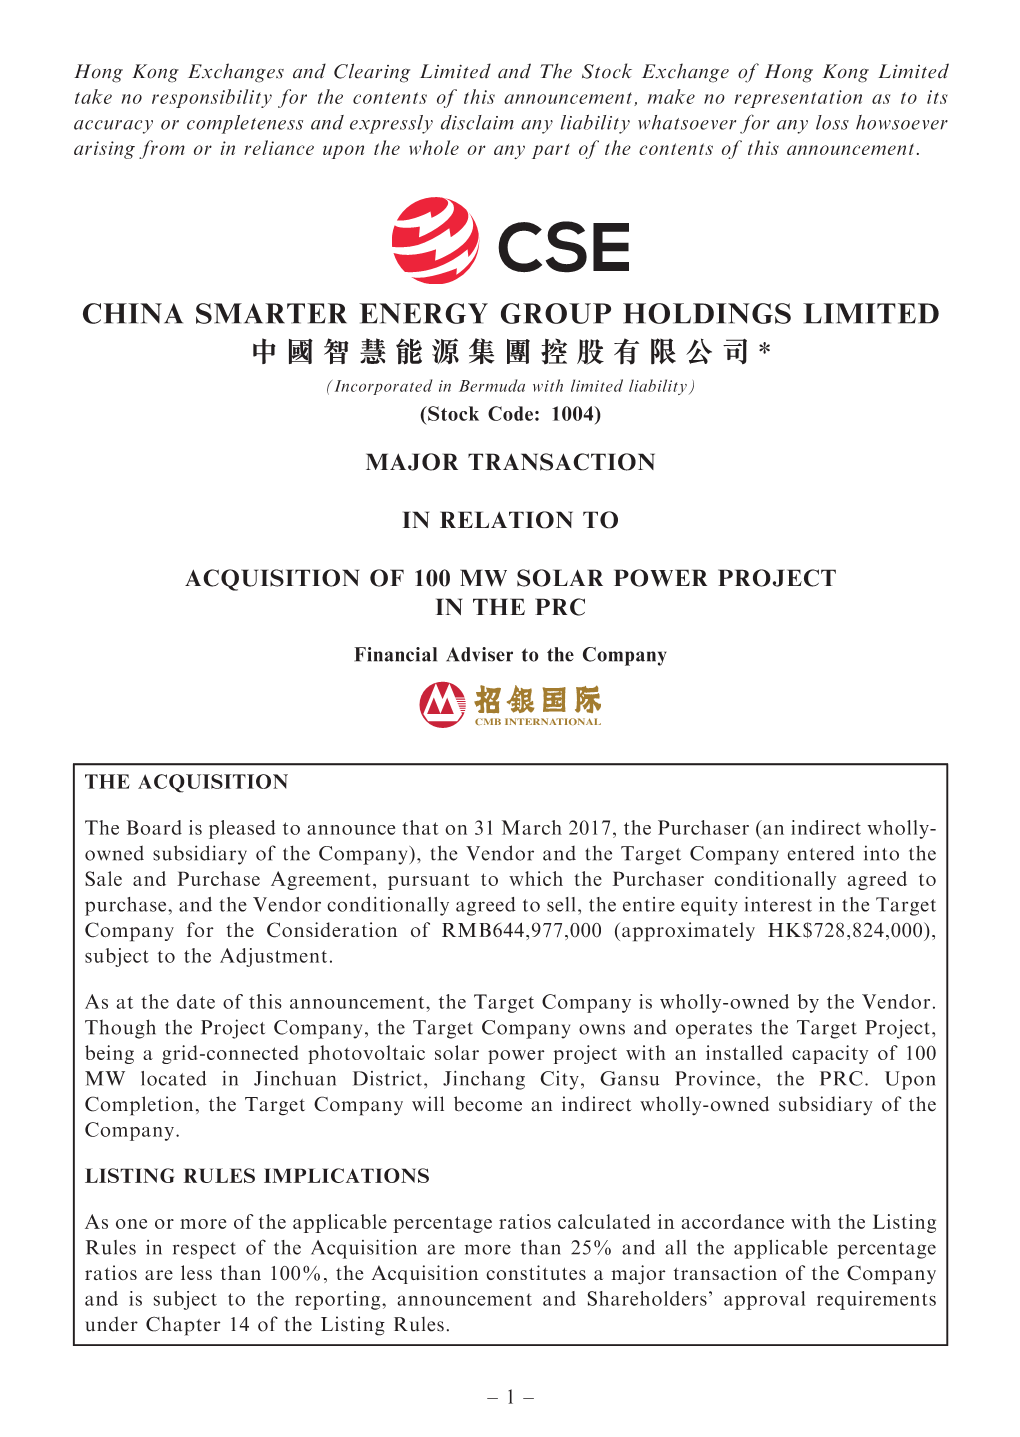 CHINA SMARTER ENERGY GROUP HOLDINGS LIMITED 中 國 智 慧 能 源 集 團 控 股 有 限 公 司 * (Incorporated in Bermuda with Limited Liability) (Stock Code: 1004)